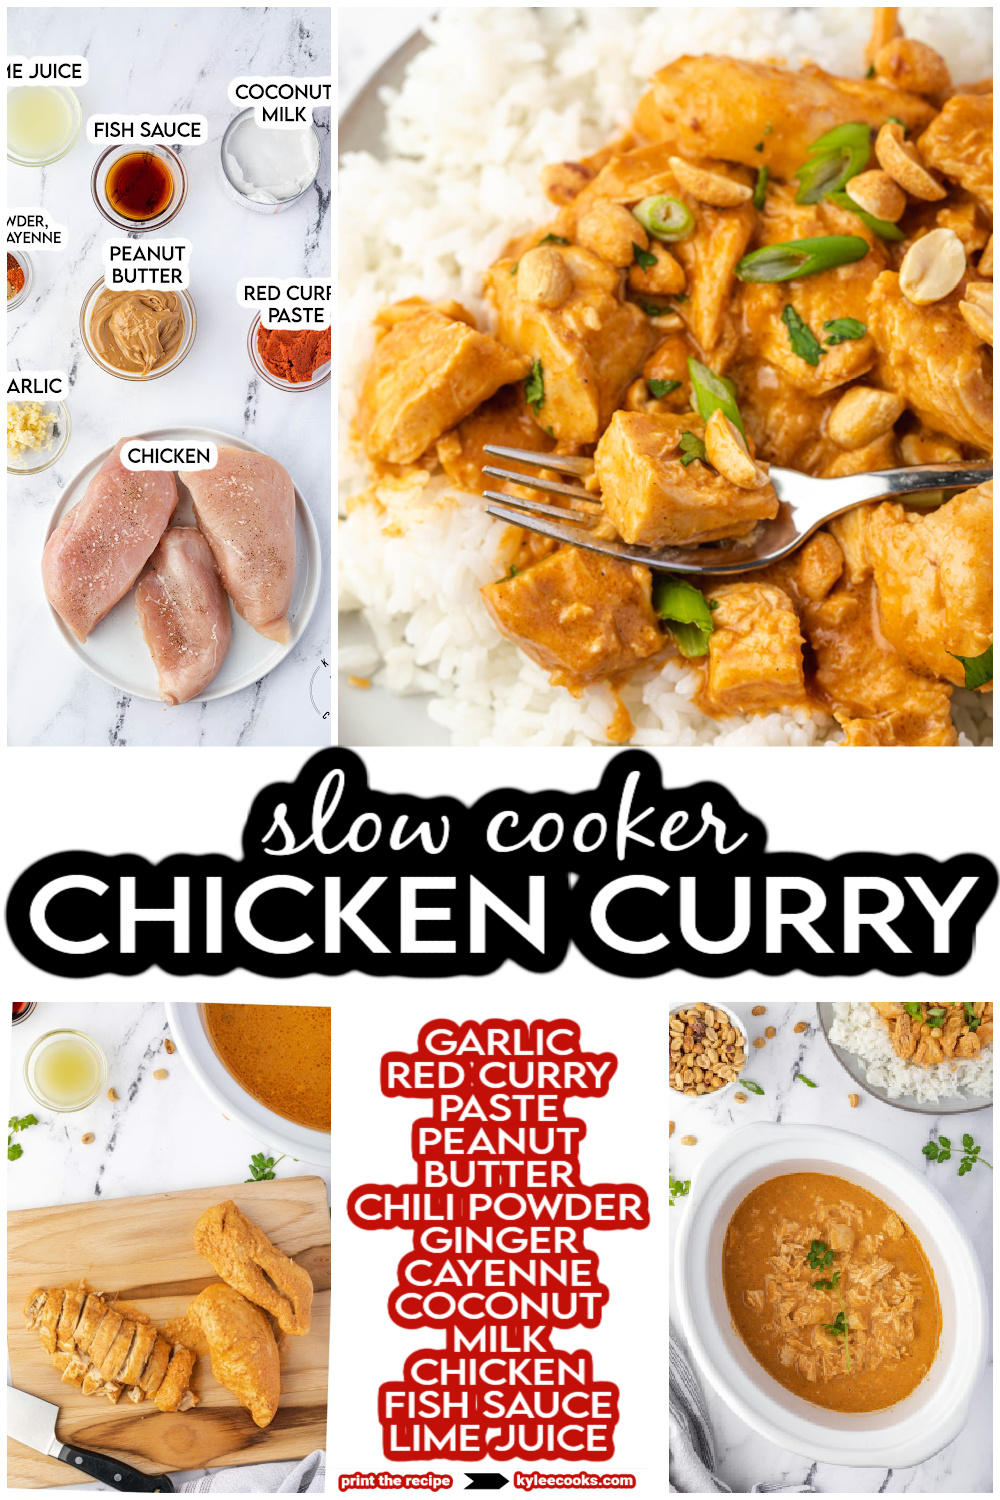 crockpot chicken curry with recipe name overlaid in text.